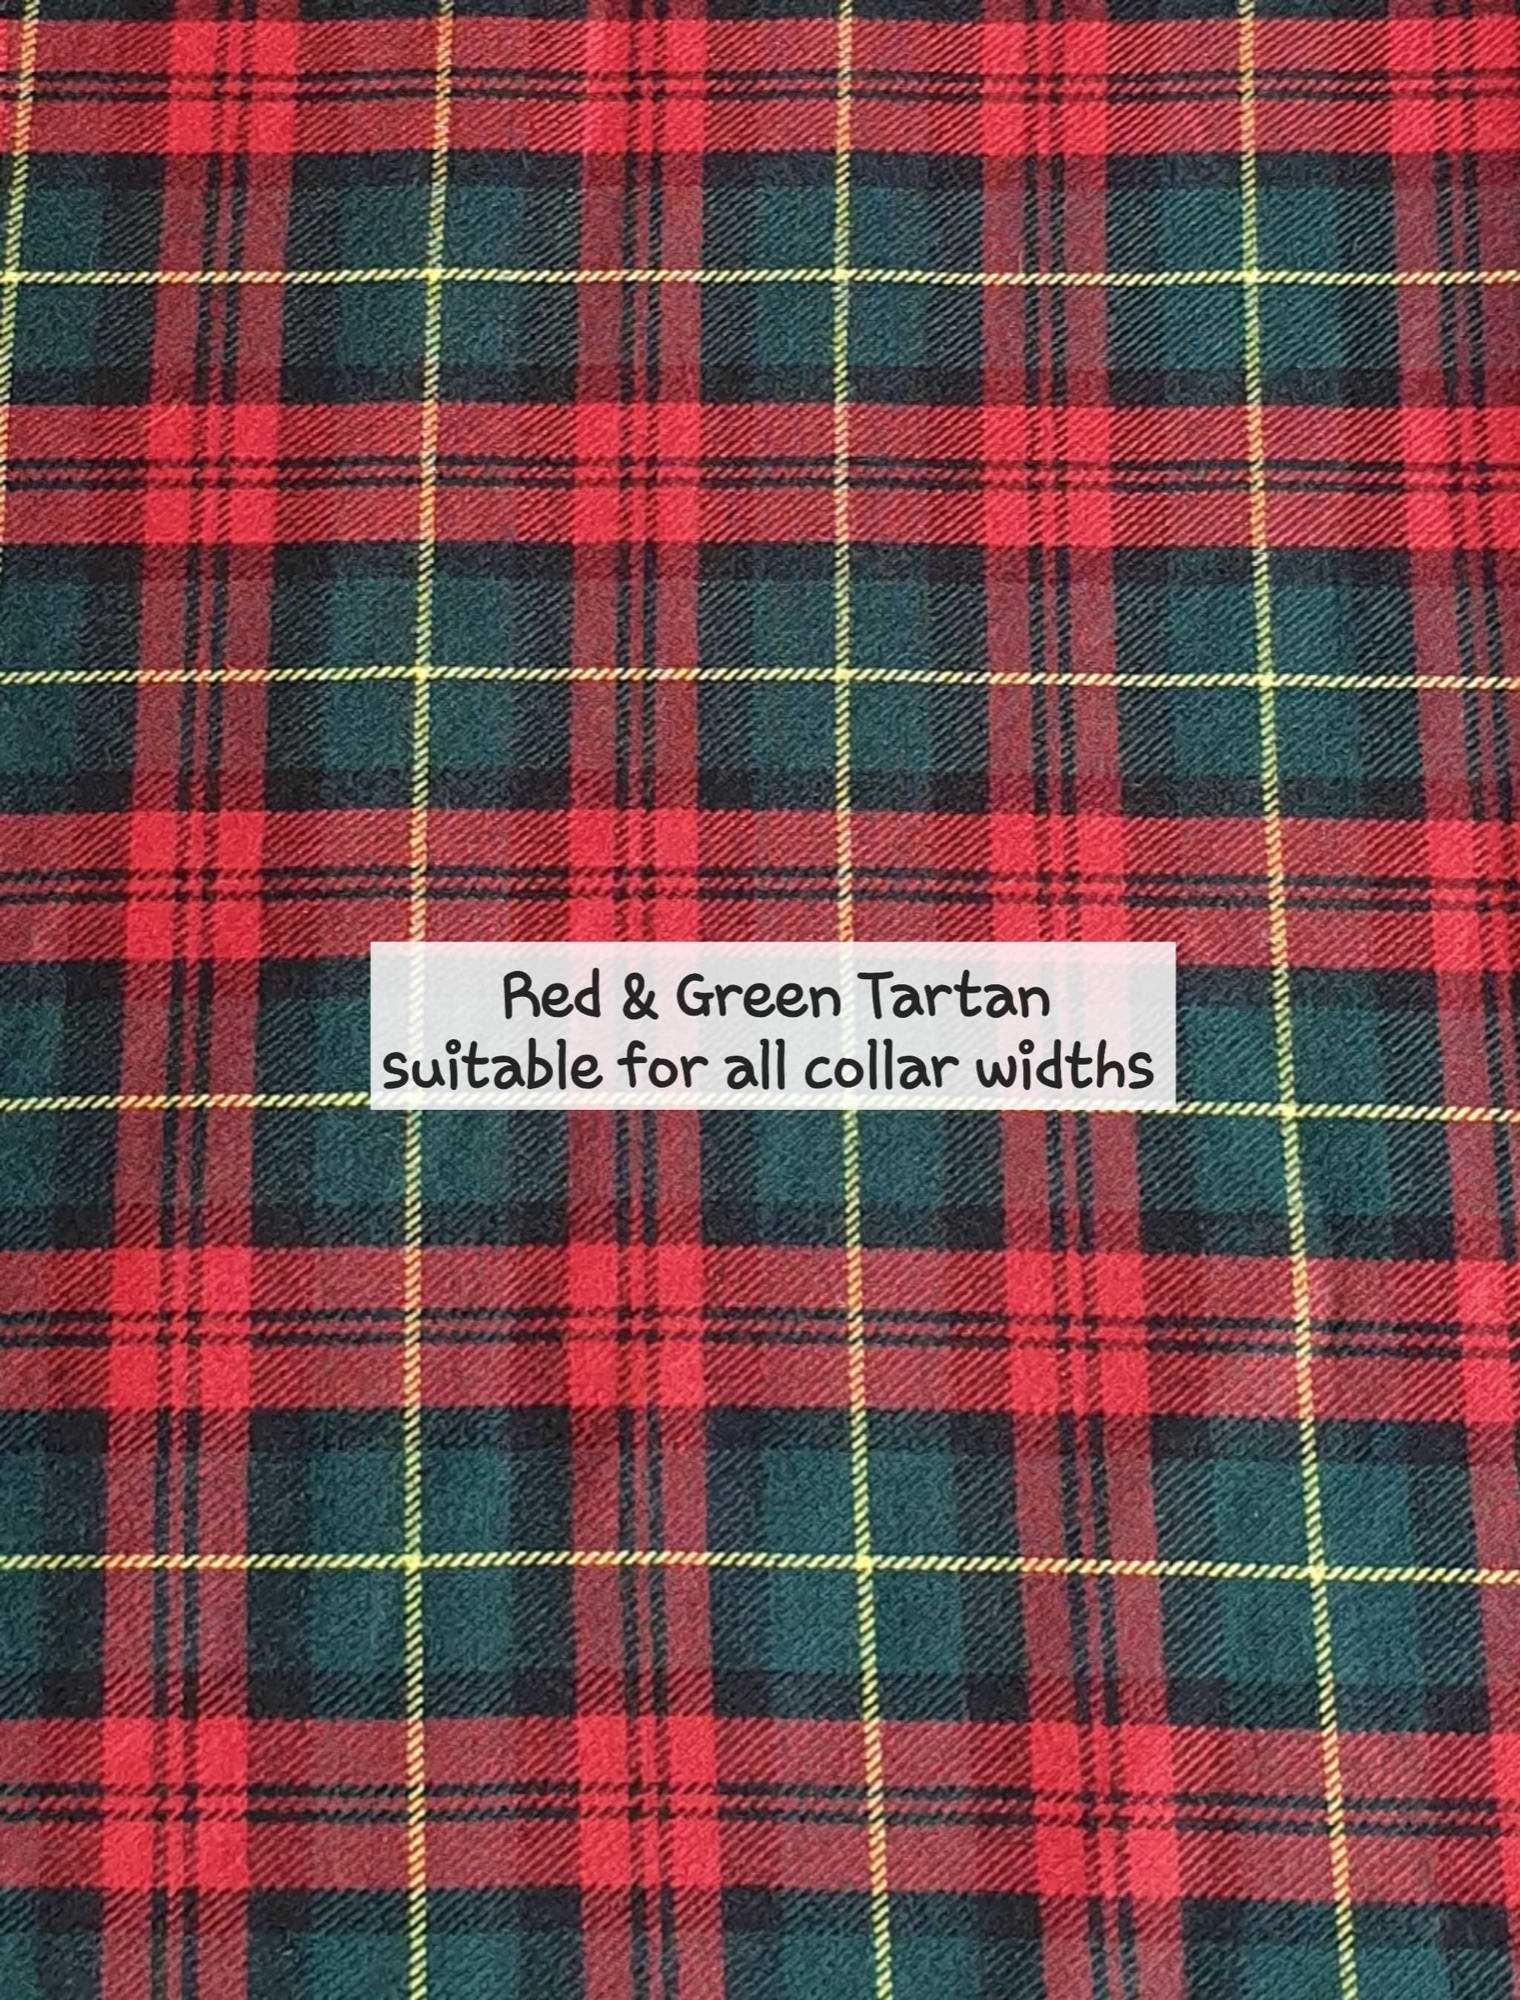 red and green tartan